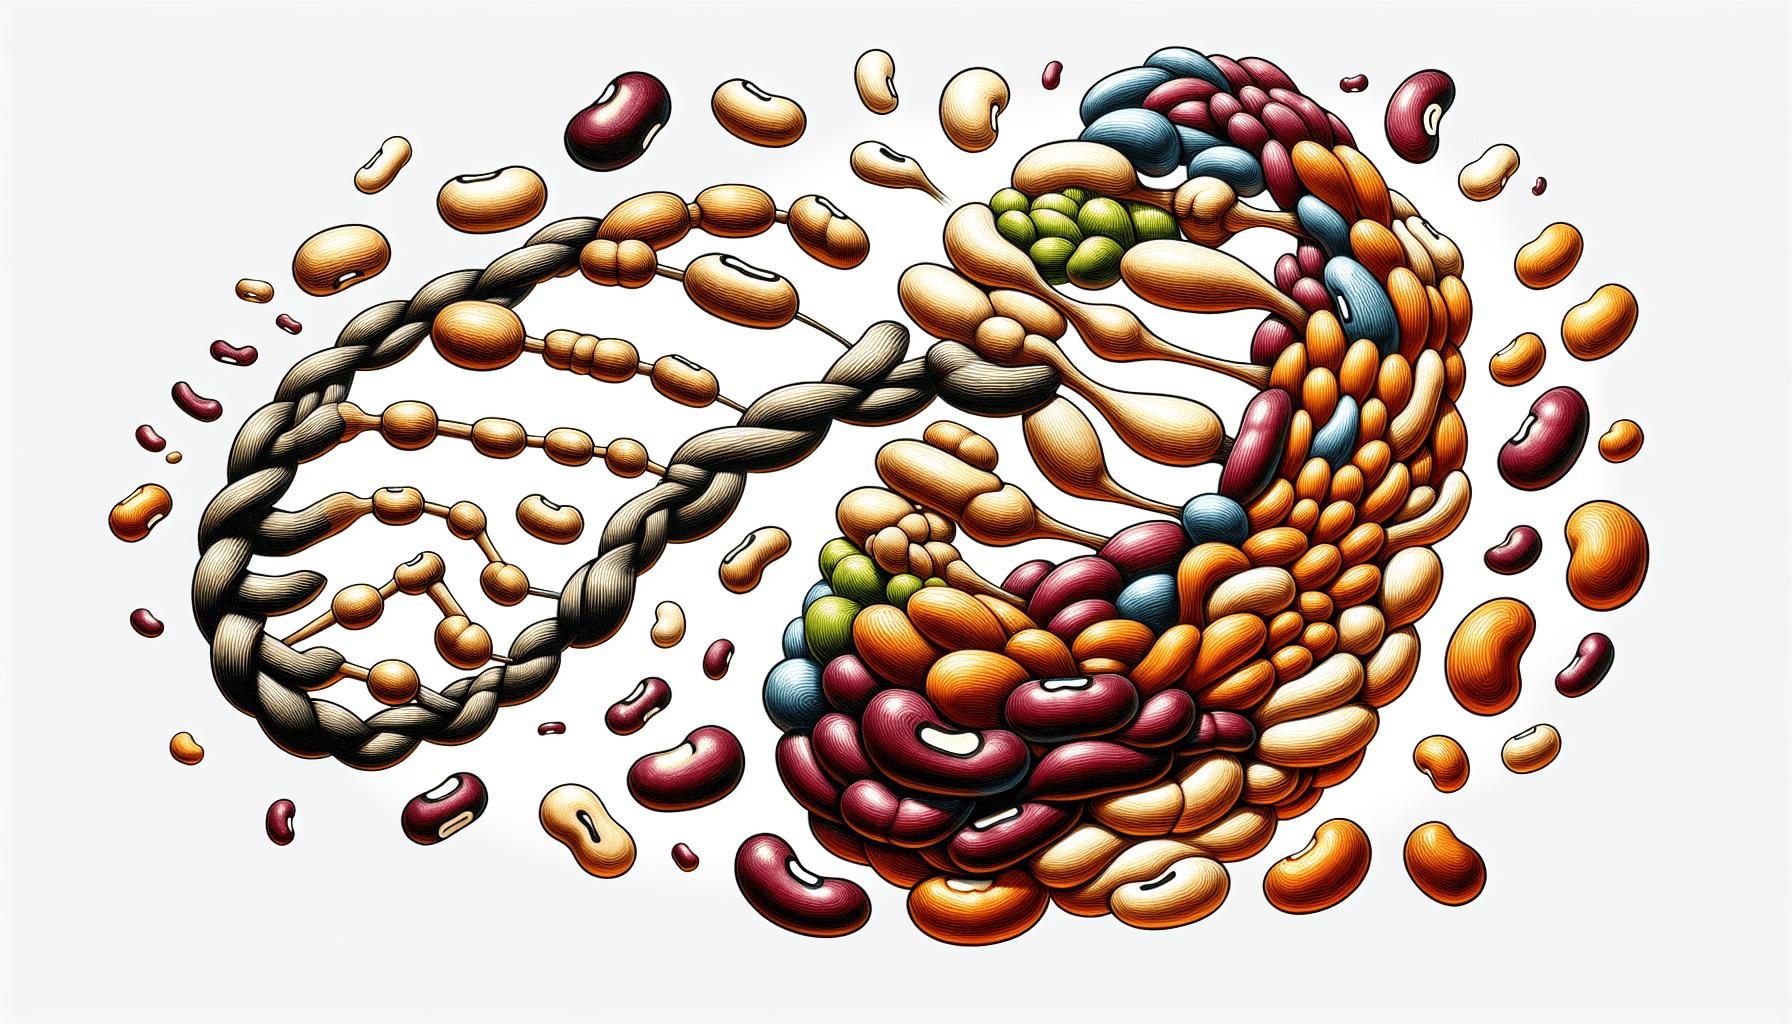 4 are there specific types of beans that are particularly high in protein